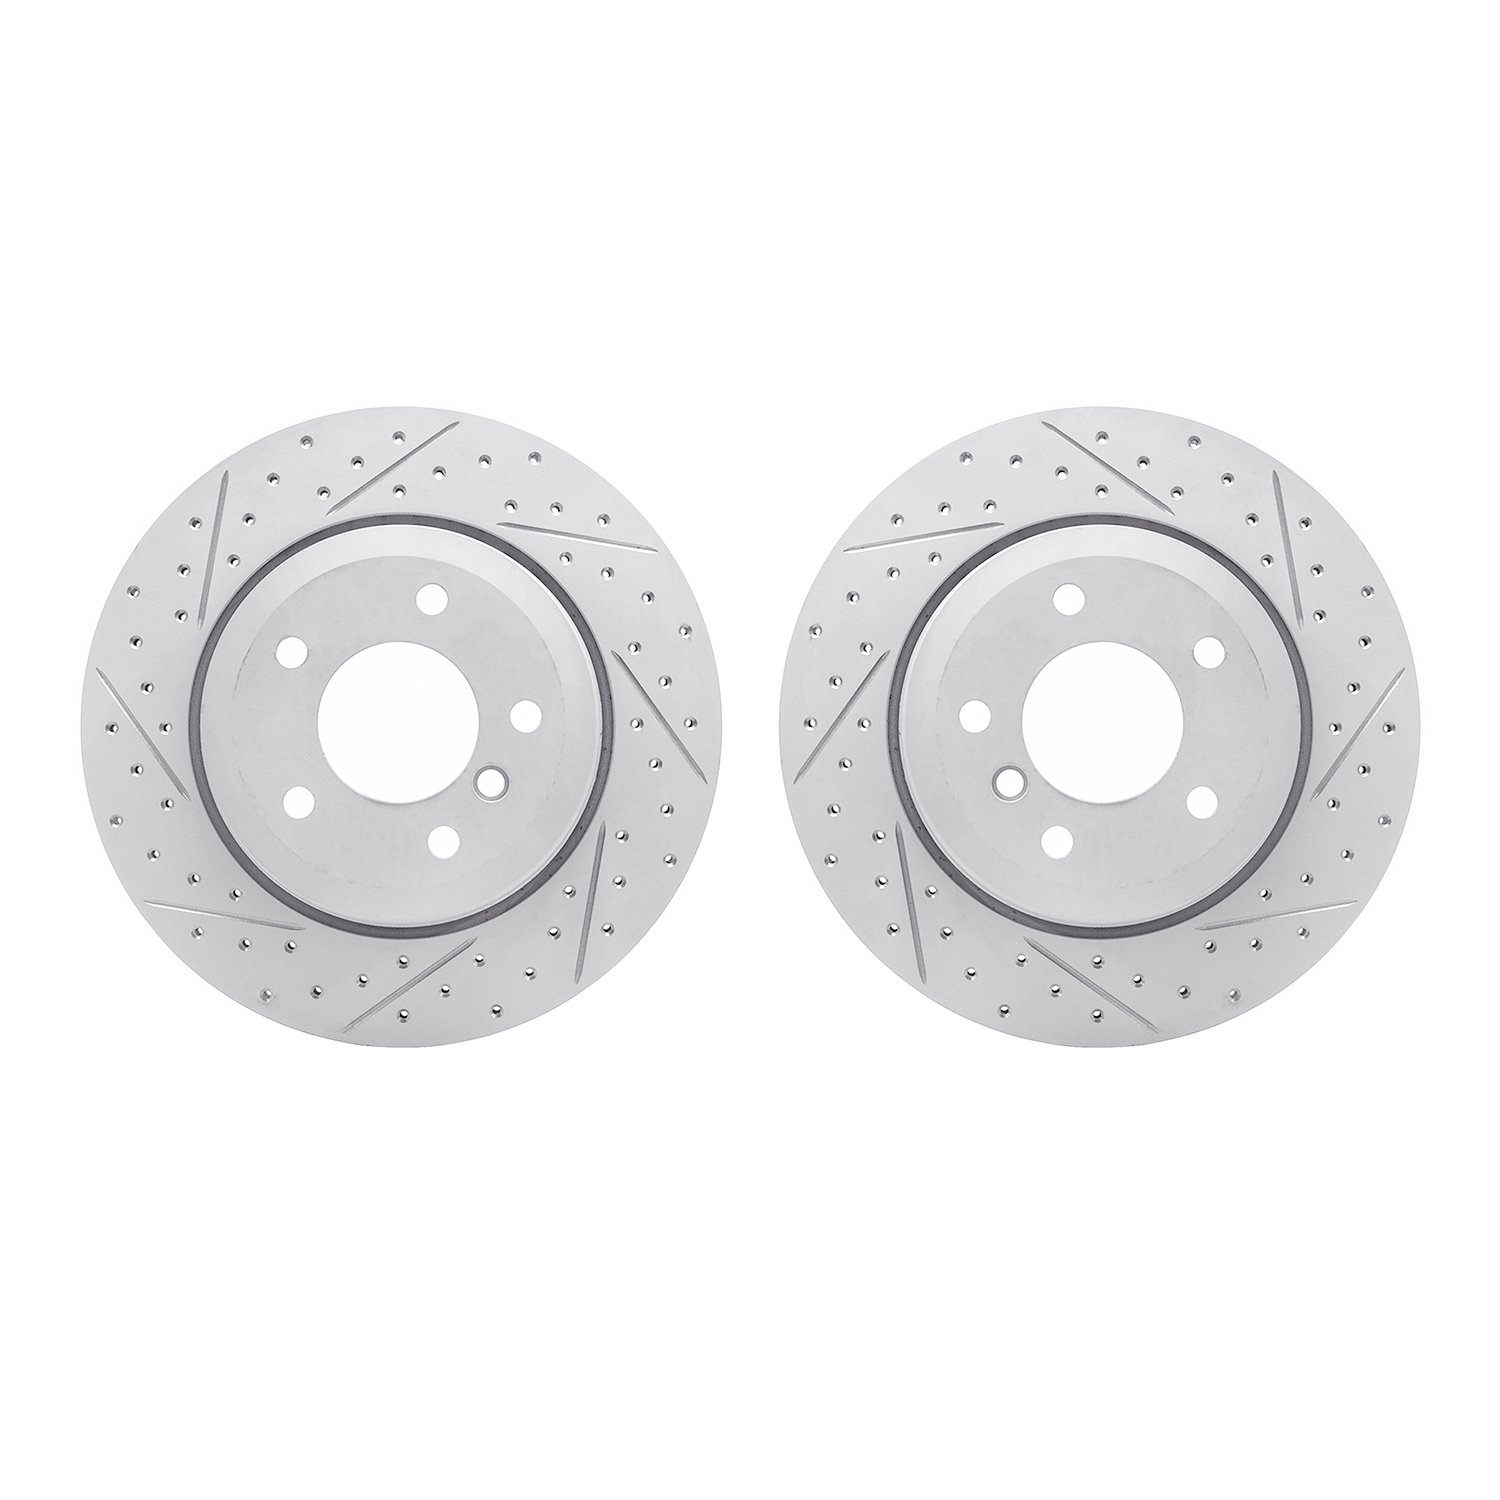 2002-31075 Geoperformance Drilled/Slotted Brake Rotors, 2006-2010 BMW, Position: Rear